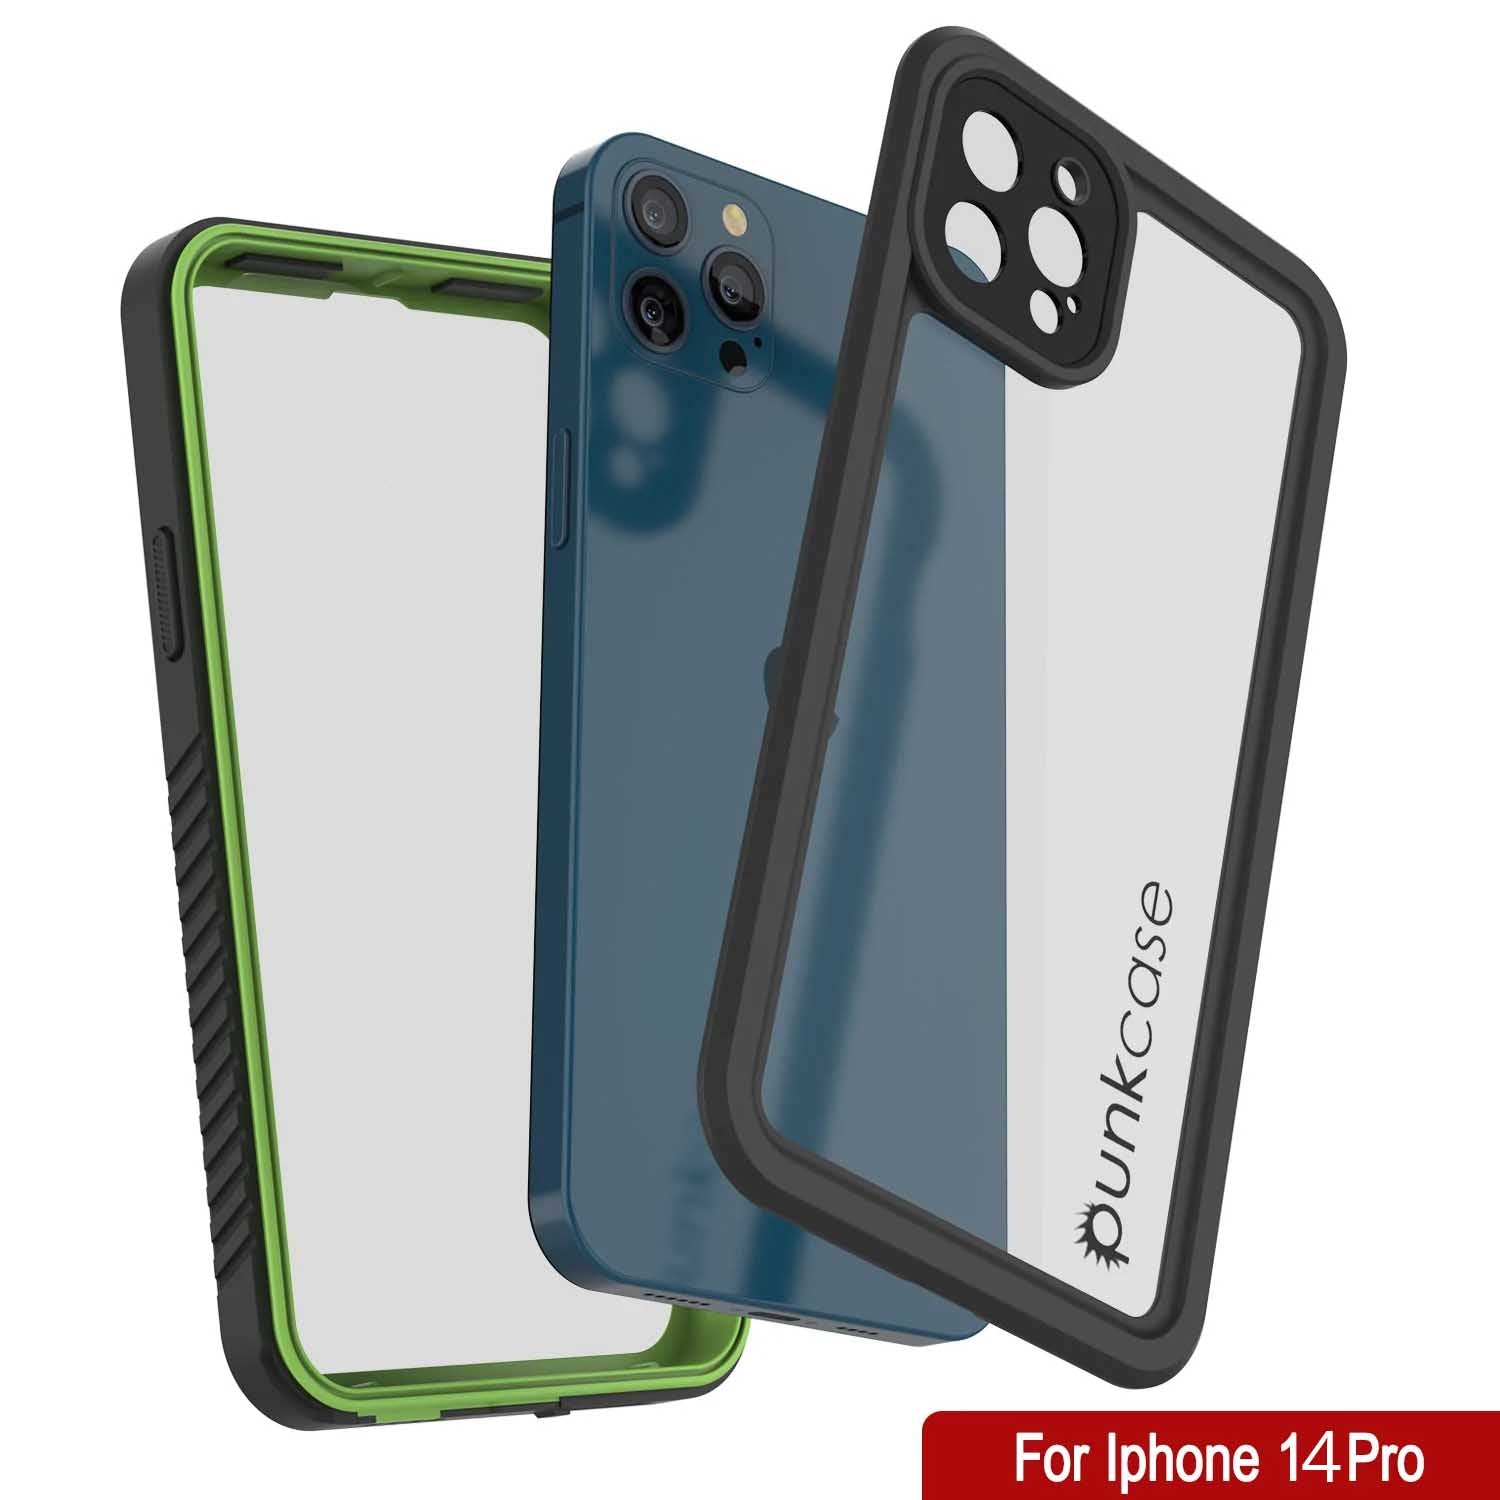 iPhone 14 Pro Waterproof Case, Punkcase [Extreme Series] Armor Cover W/ Built In Screen Protector [Light Green]